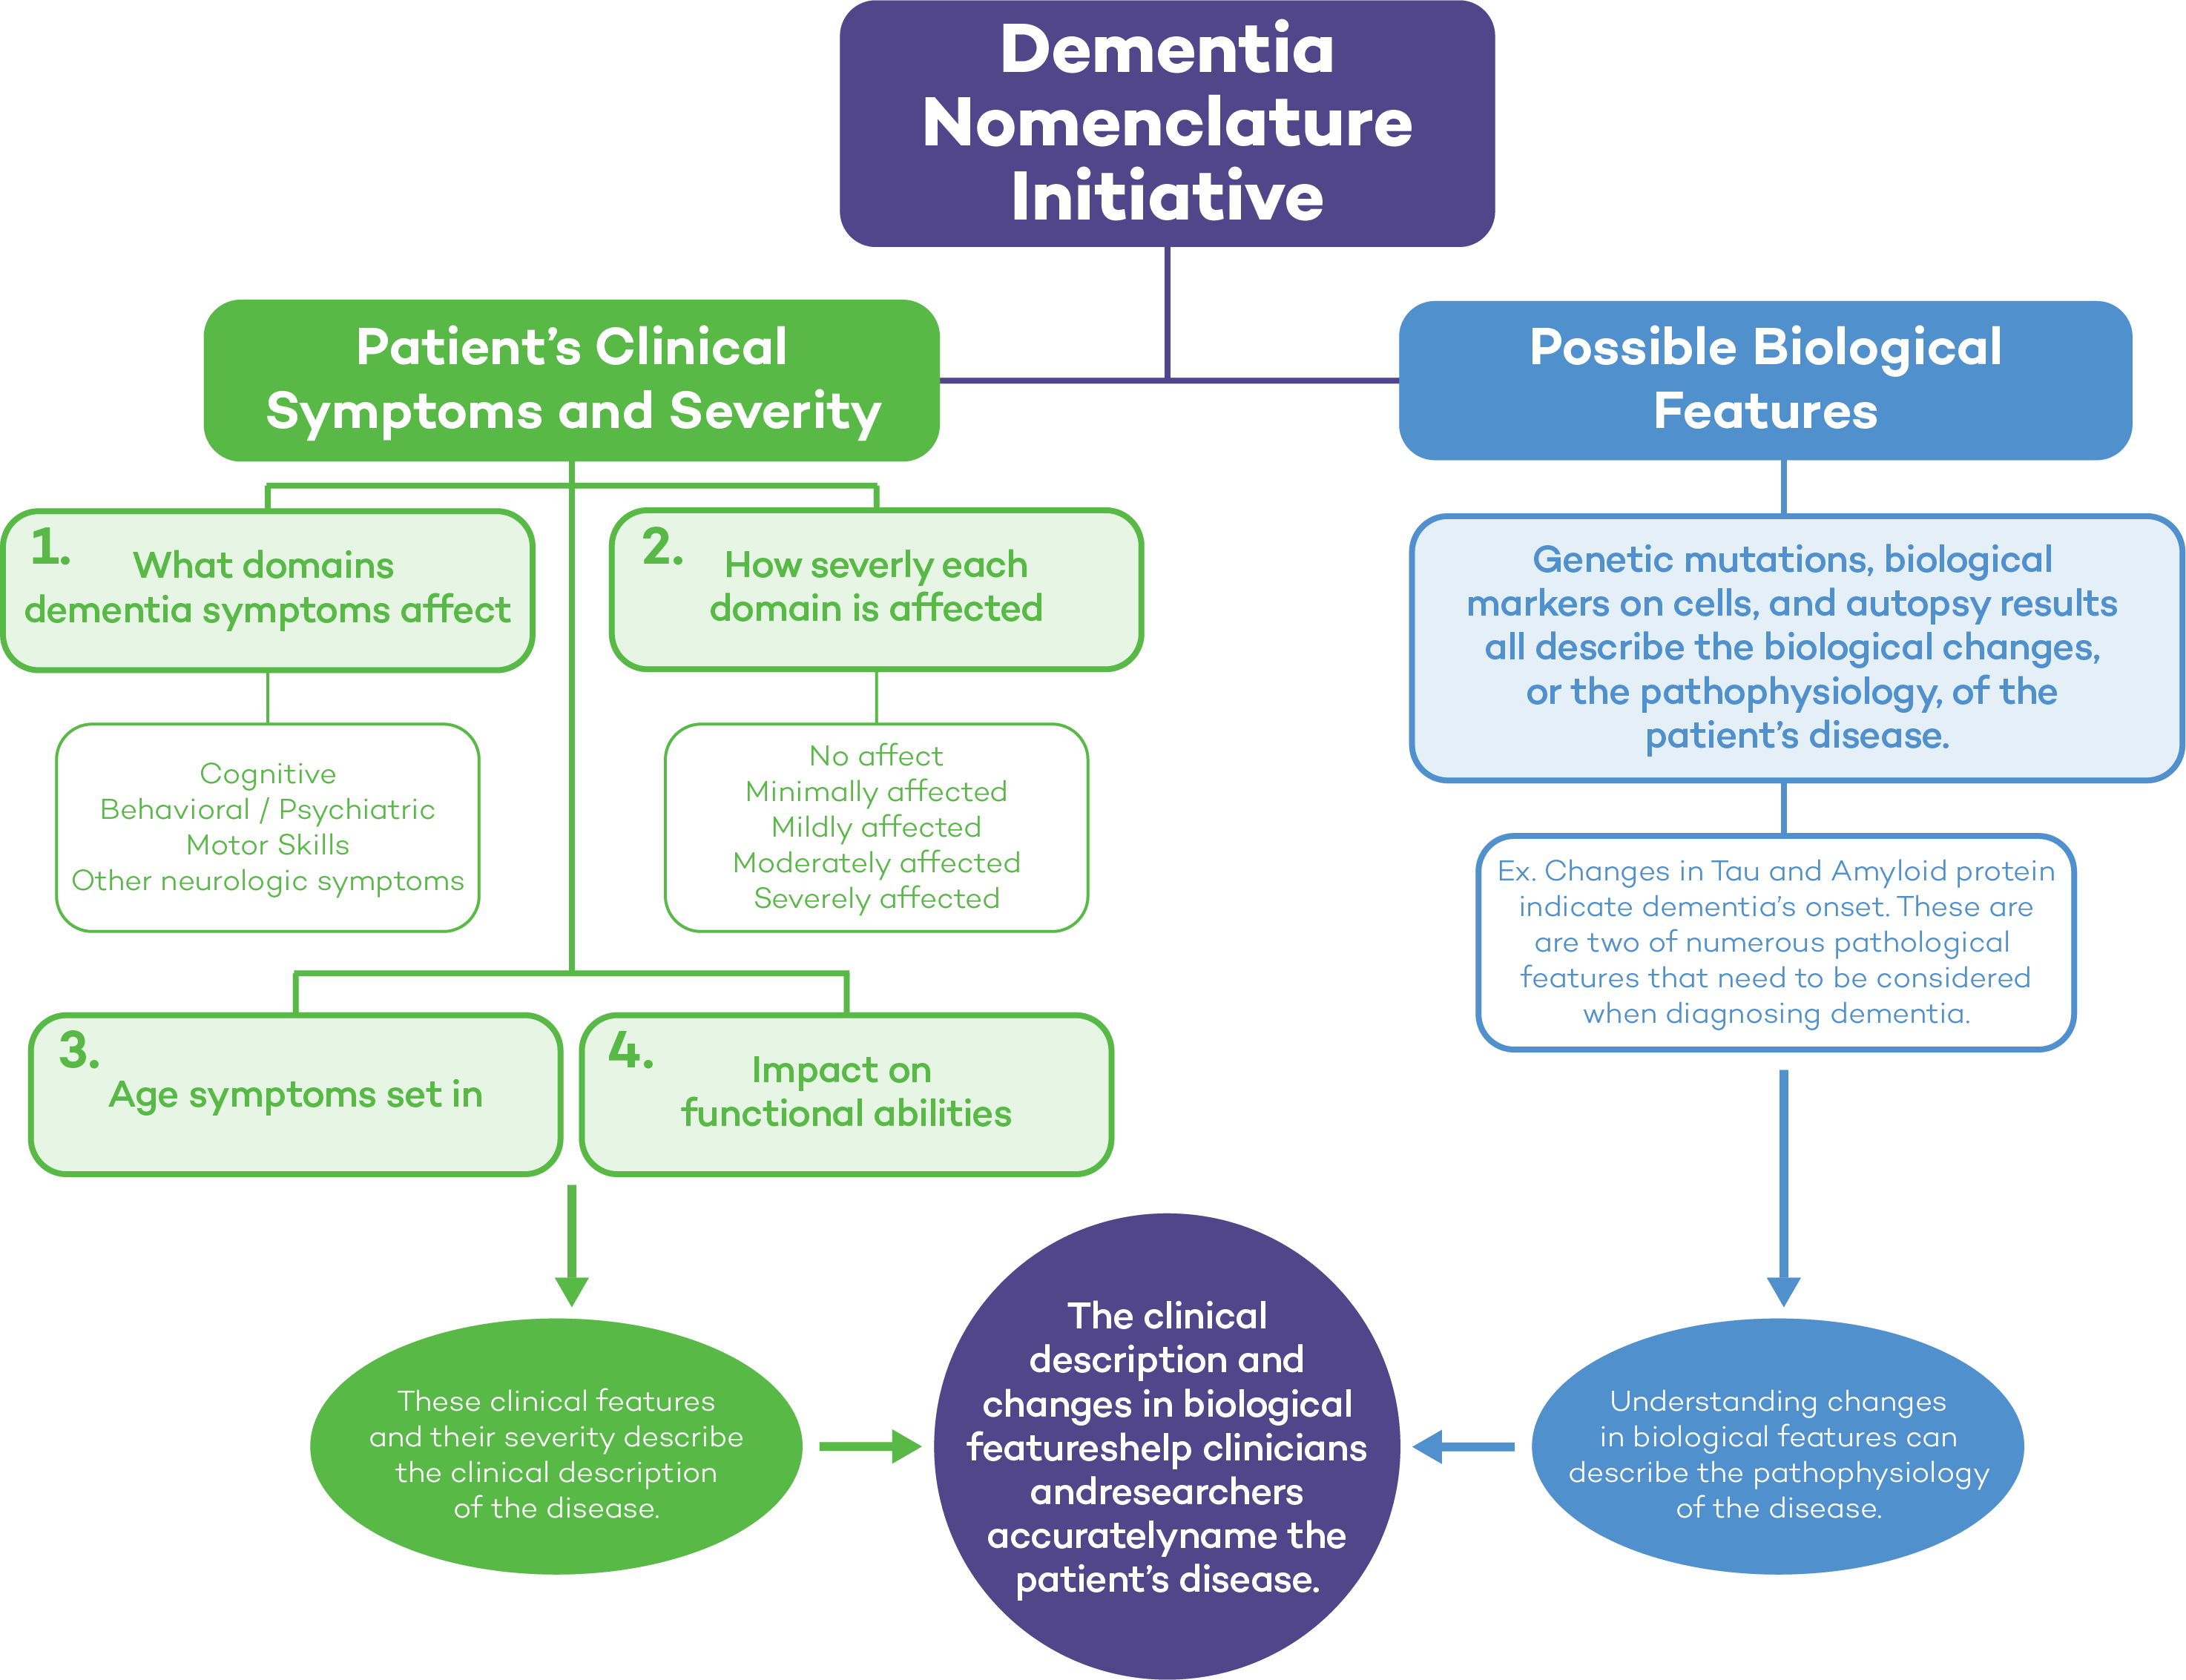 The Dementia Nomenclature Initiative published a framework on Oct. 16, 2023 to divide dementia-related diseases’ clinical symptoms and biology into two separate categories. The team created a flowchart for standardizing diagnosis through initial findings from three focus groups, patients, clinicians and researchers, according to the study. (Image provided by Dementia Nomenclature Initiative)